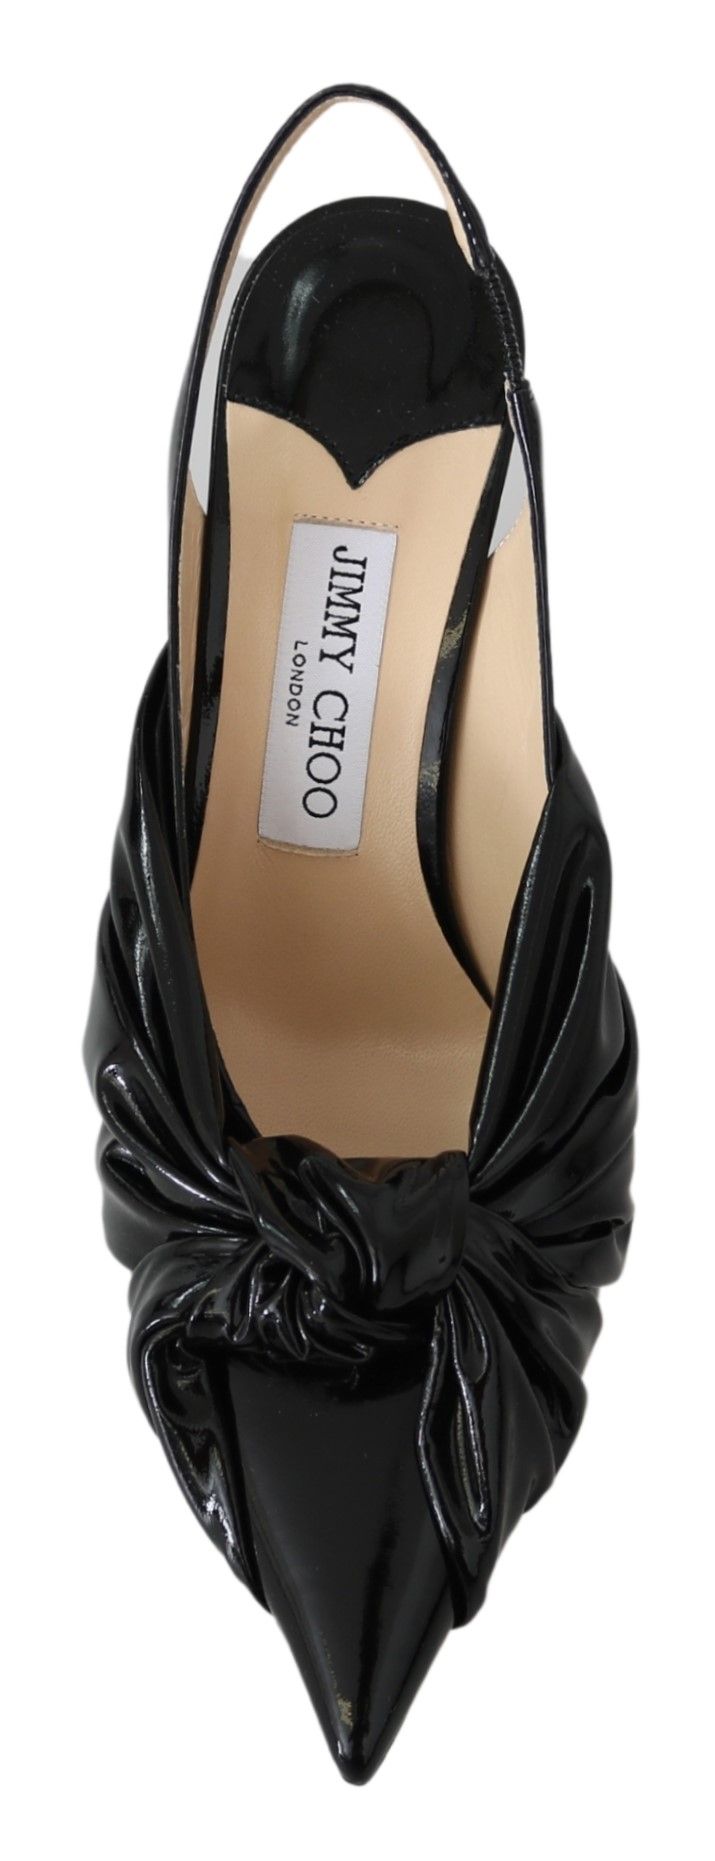 Jimmy Choo Black Patent Leather Annabell 85 Pumps